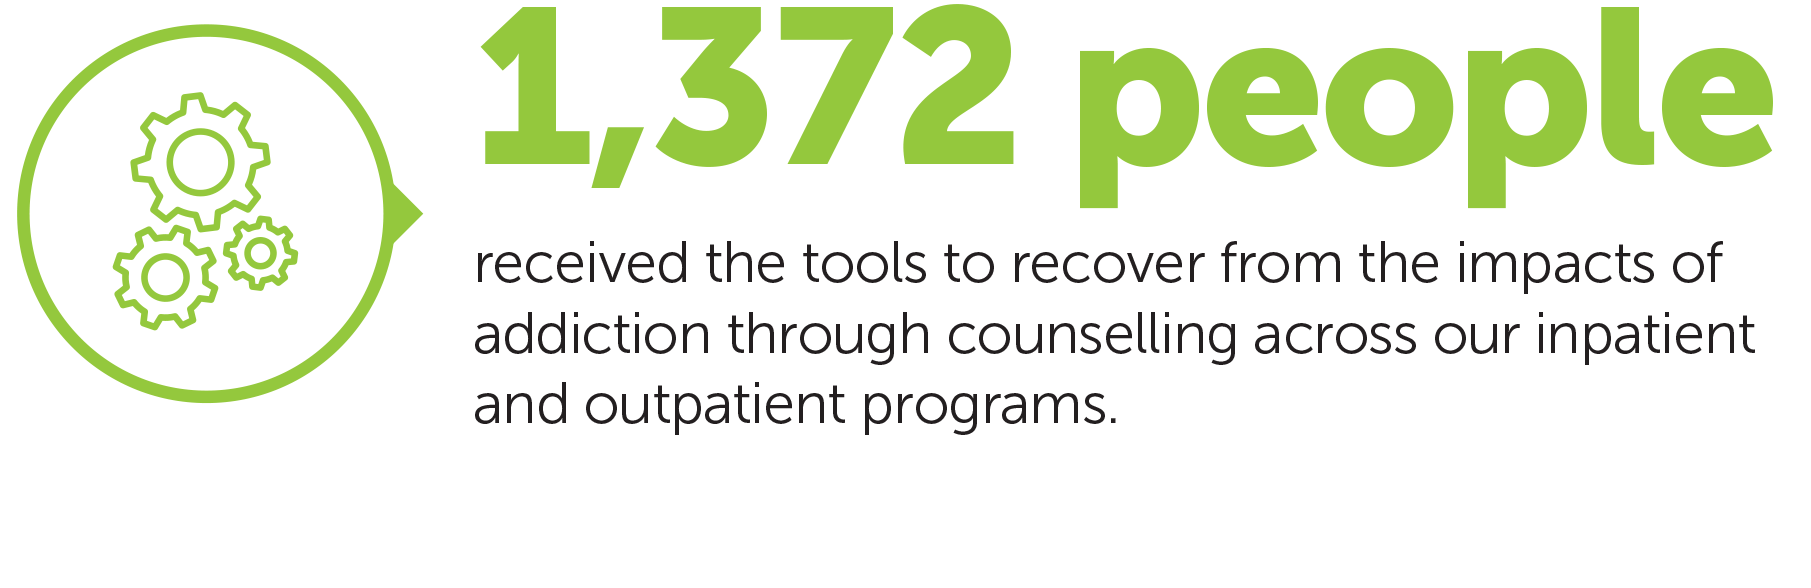 An infographic reading 1,372 people received the tools to recover from the impacts of addiction through counselling across our inpatient and outpatient programs.